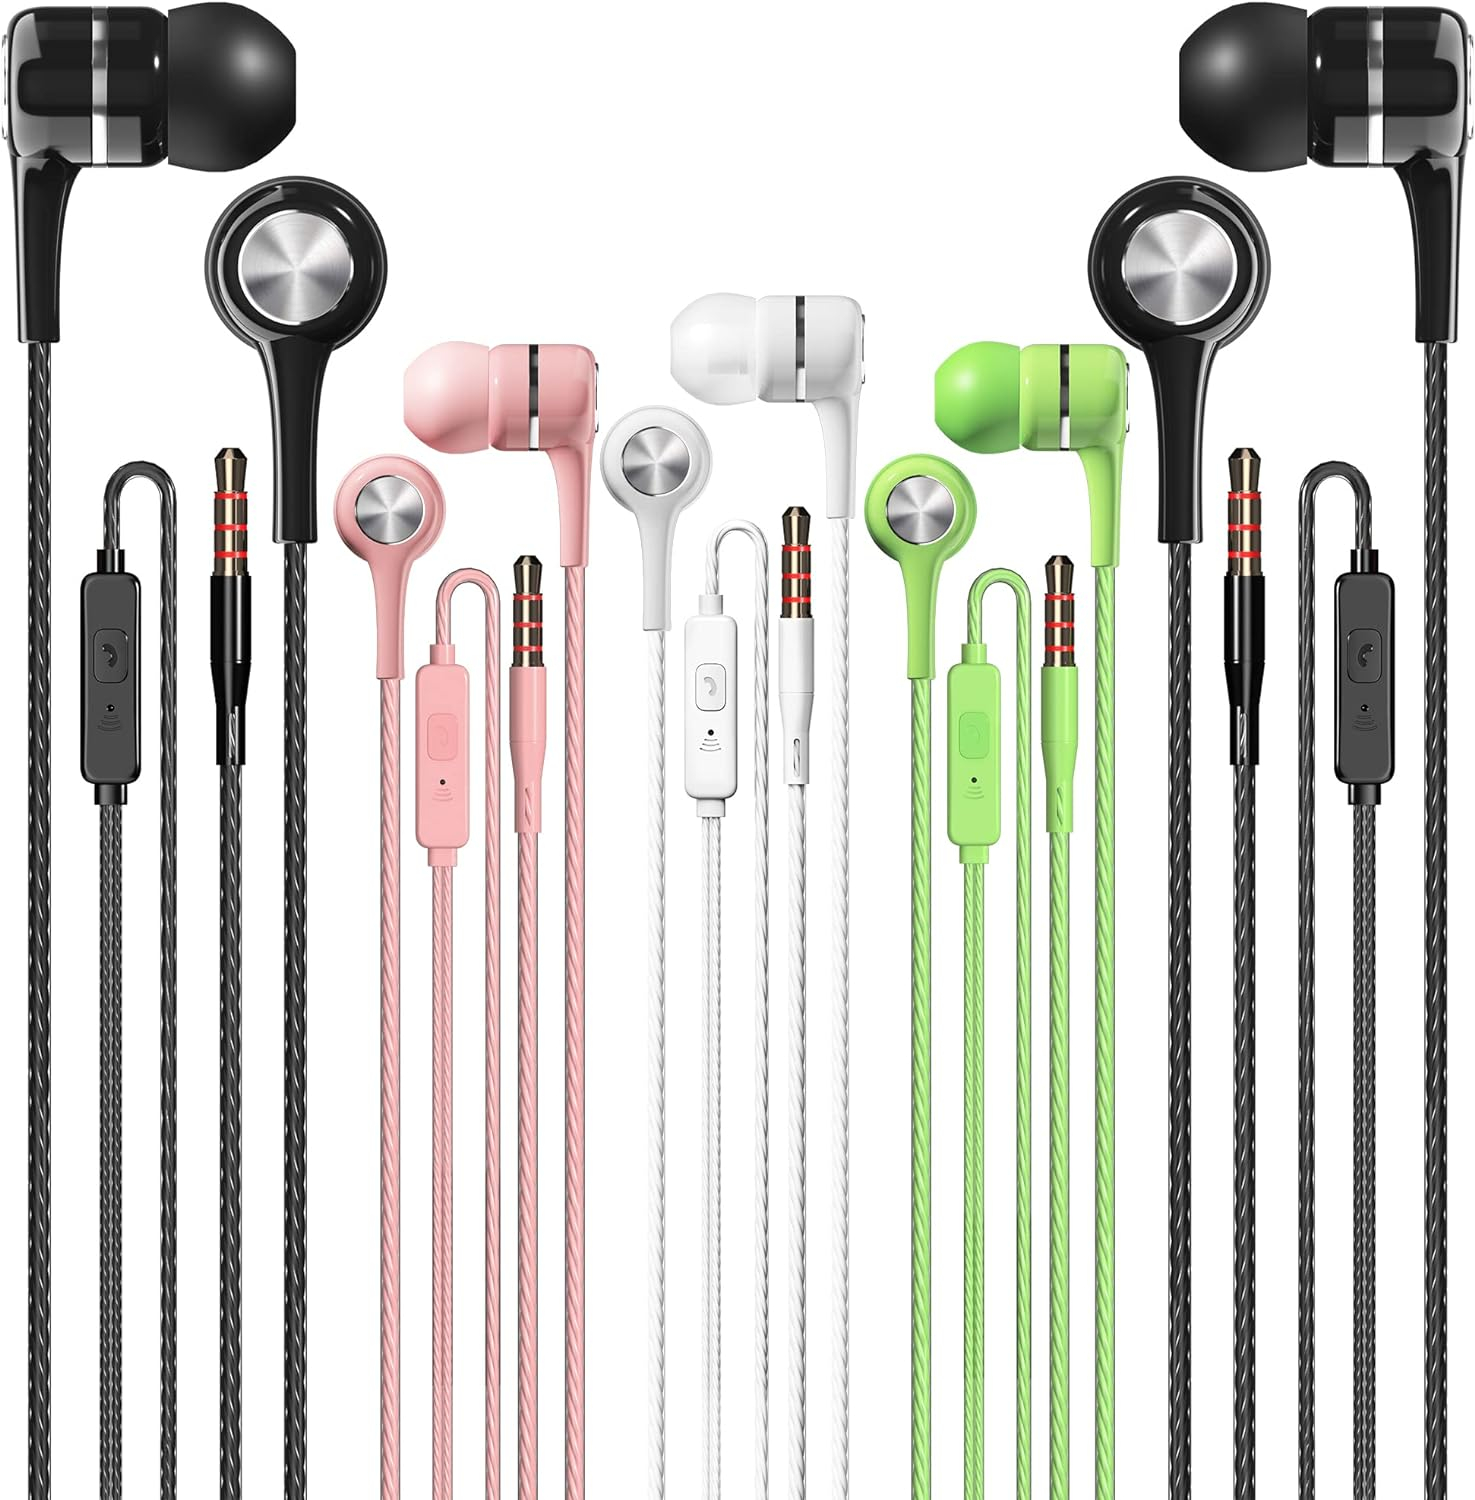 LWZCAM Earbuds Earphones with Microphone, 5 Pack Ear Buds Wired Heavy Bass Headphones, Earphone with Noise Isolating, Fits 3.5mm Interface for iPad, Desktop, MP3 Players, Android and iOS Smartphones